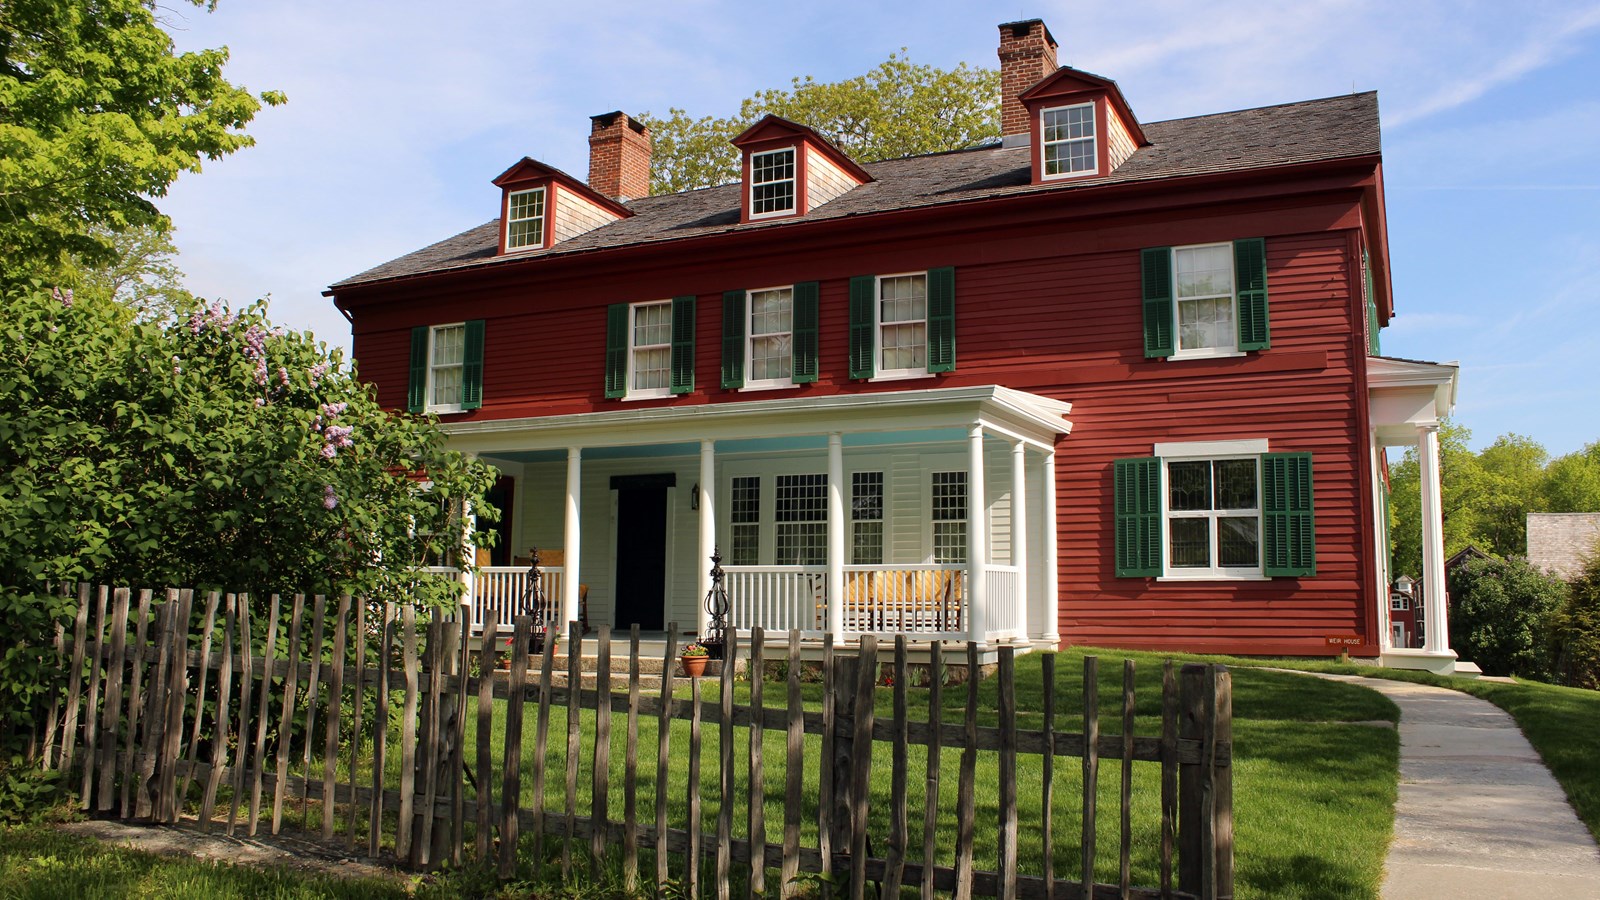 A red house with white trim and a front porch.